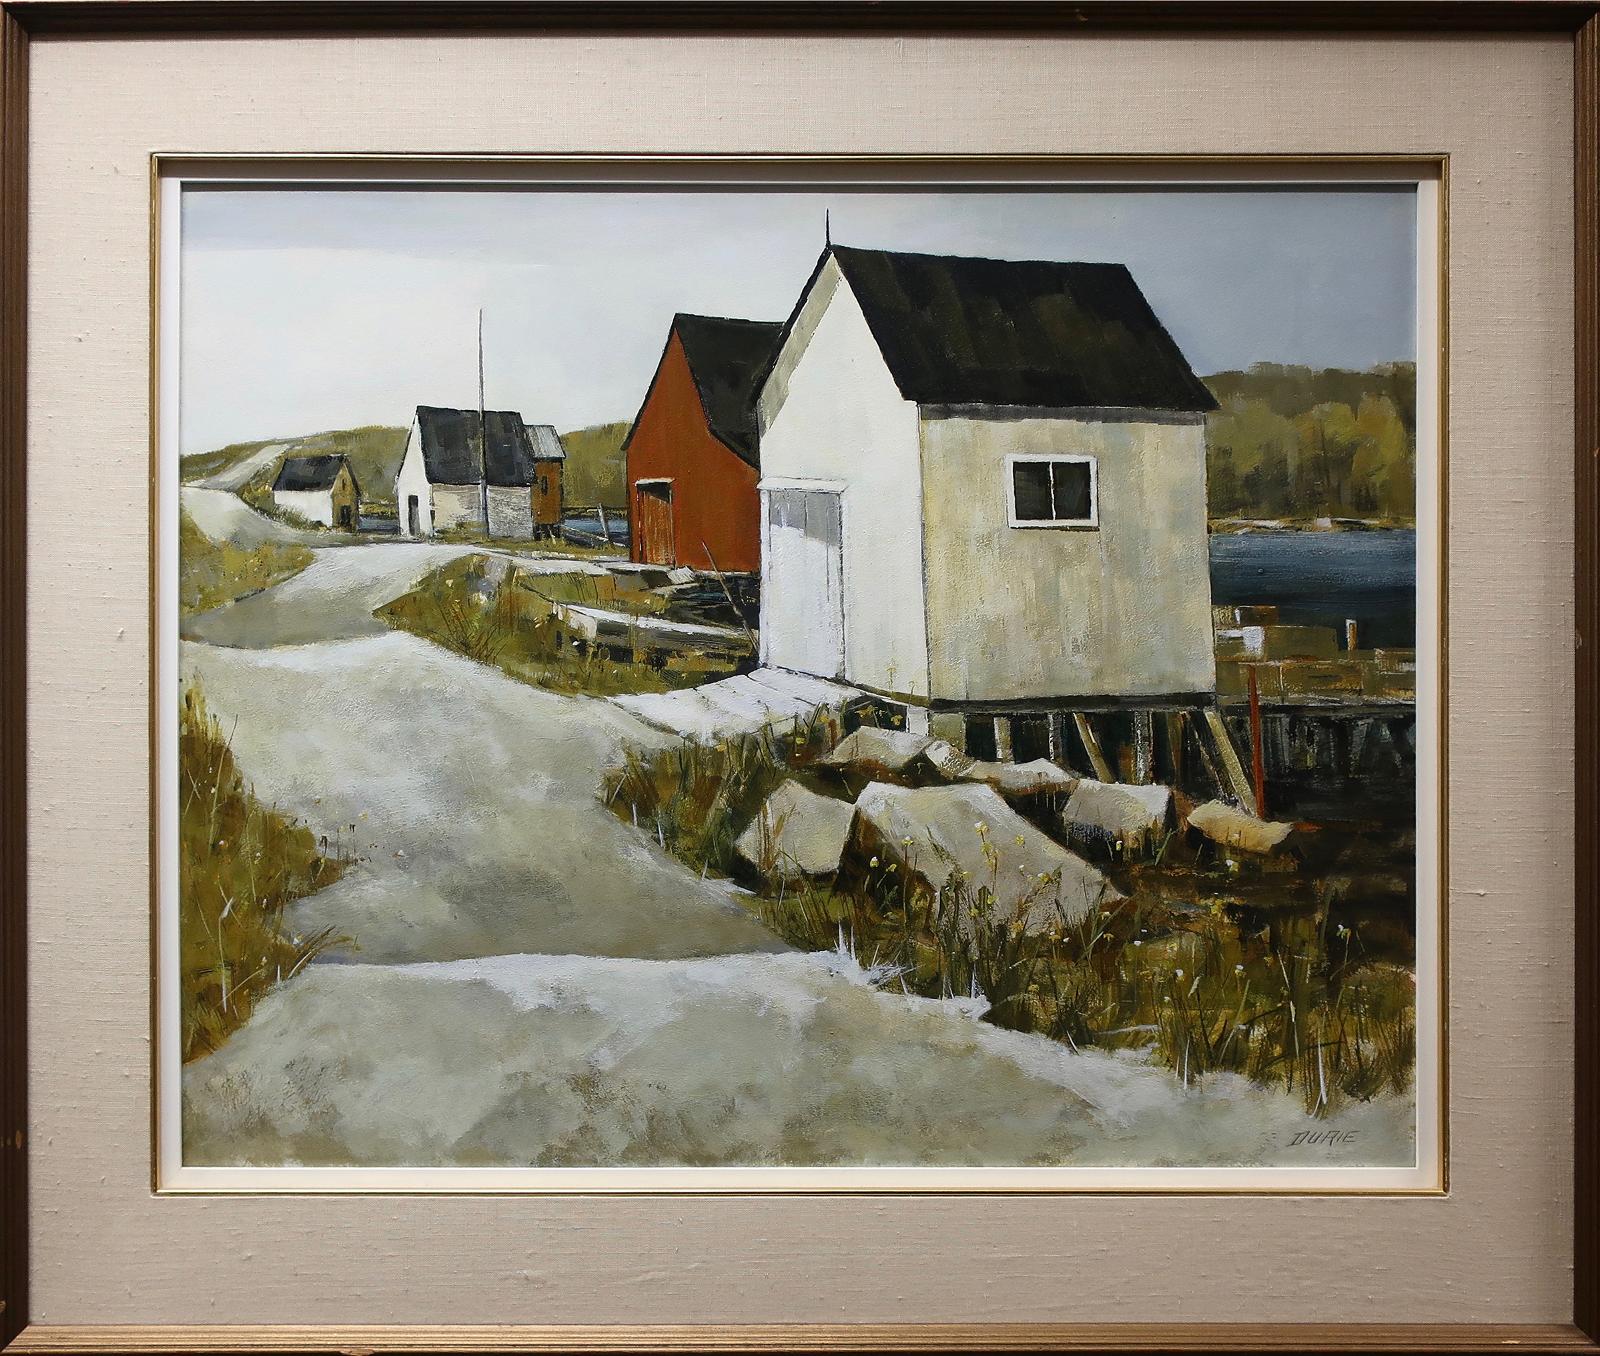 Sally Durie (1929) - Untitled (George's Walk, Boutilliers, N.S.)